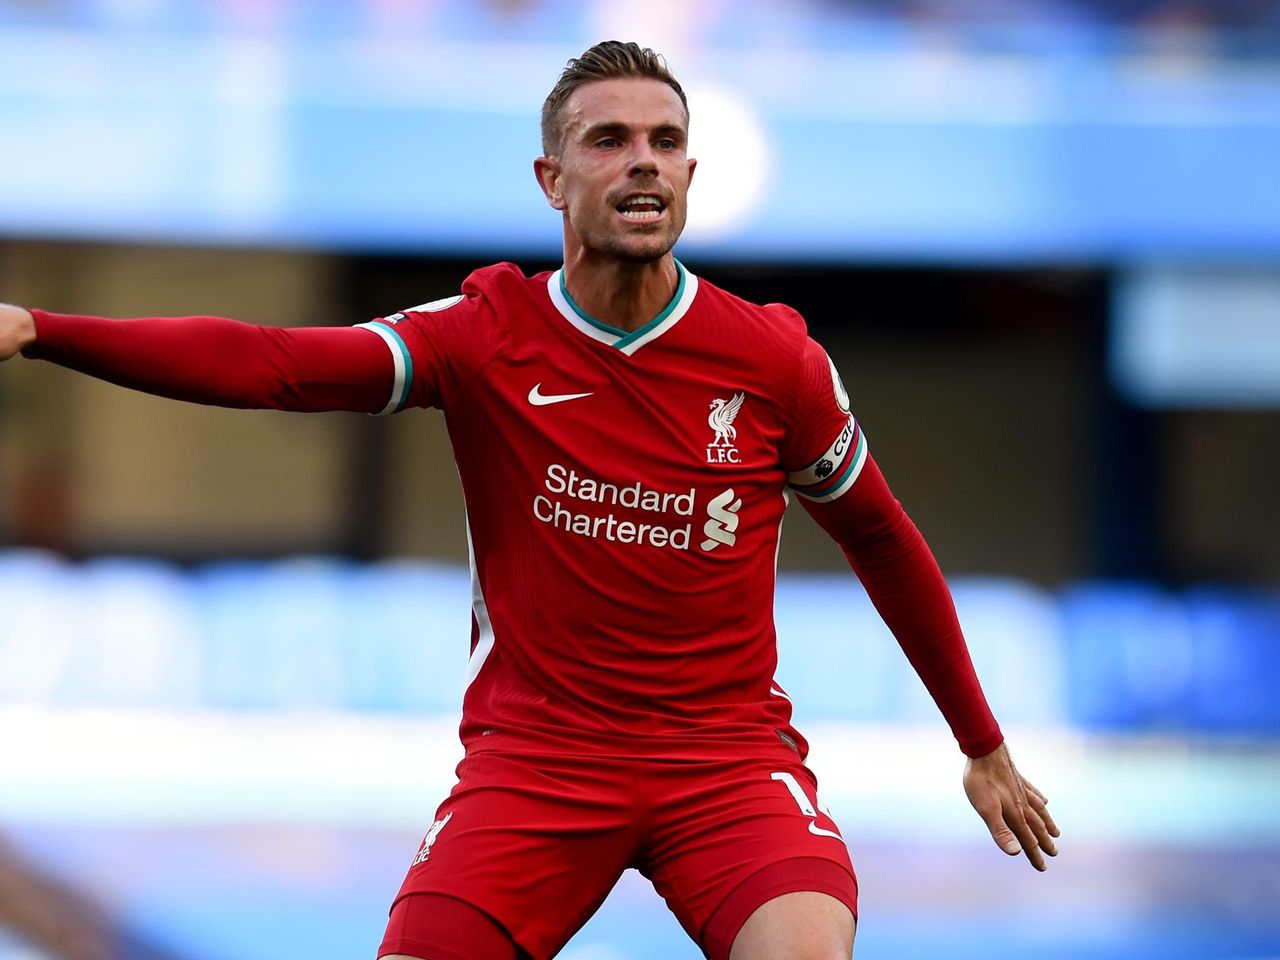 Incredible Compliance to rescue Transfer news - Liverpool captain Jordan Henderson signs new four-year deal  to end exit speculation - Eurosport